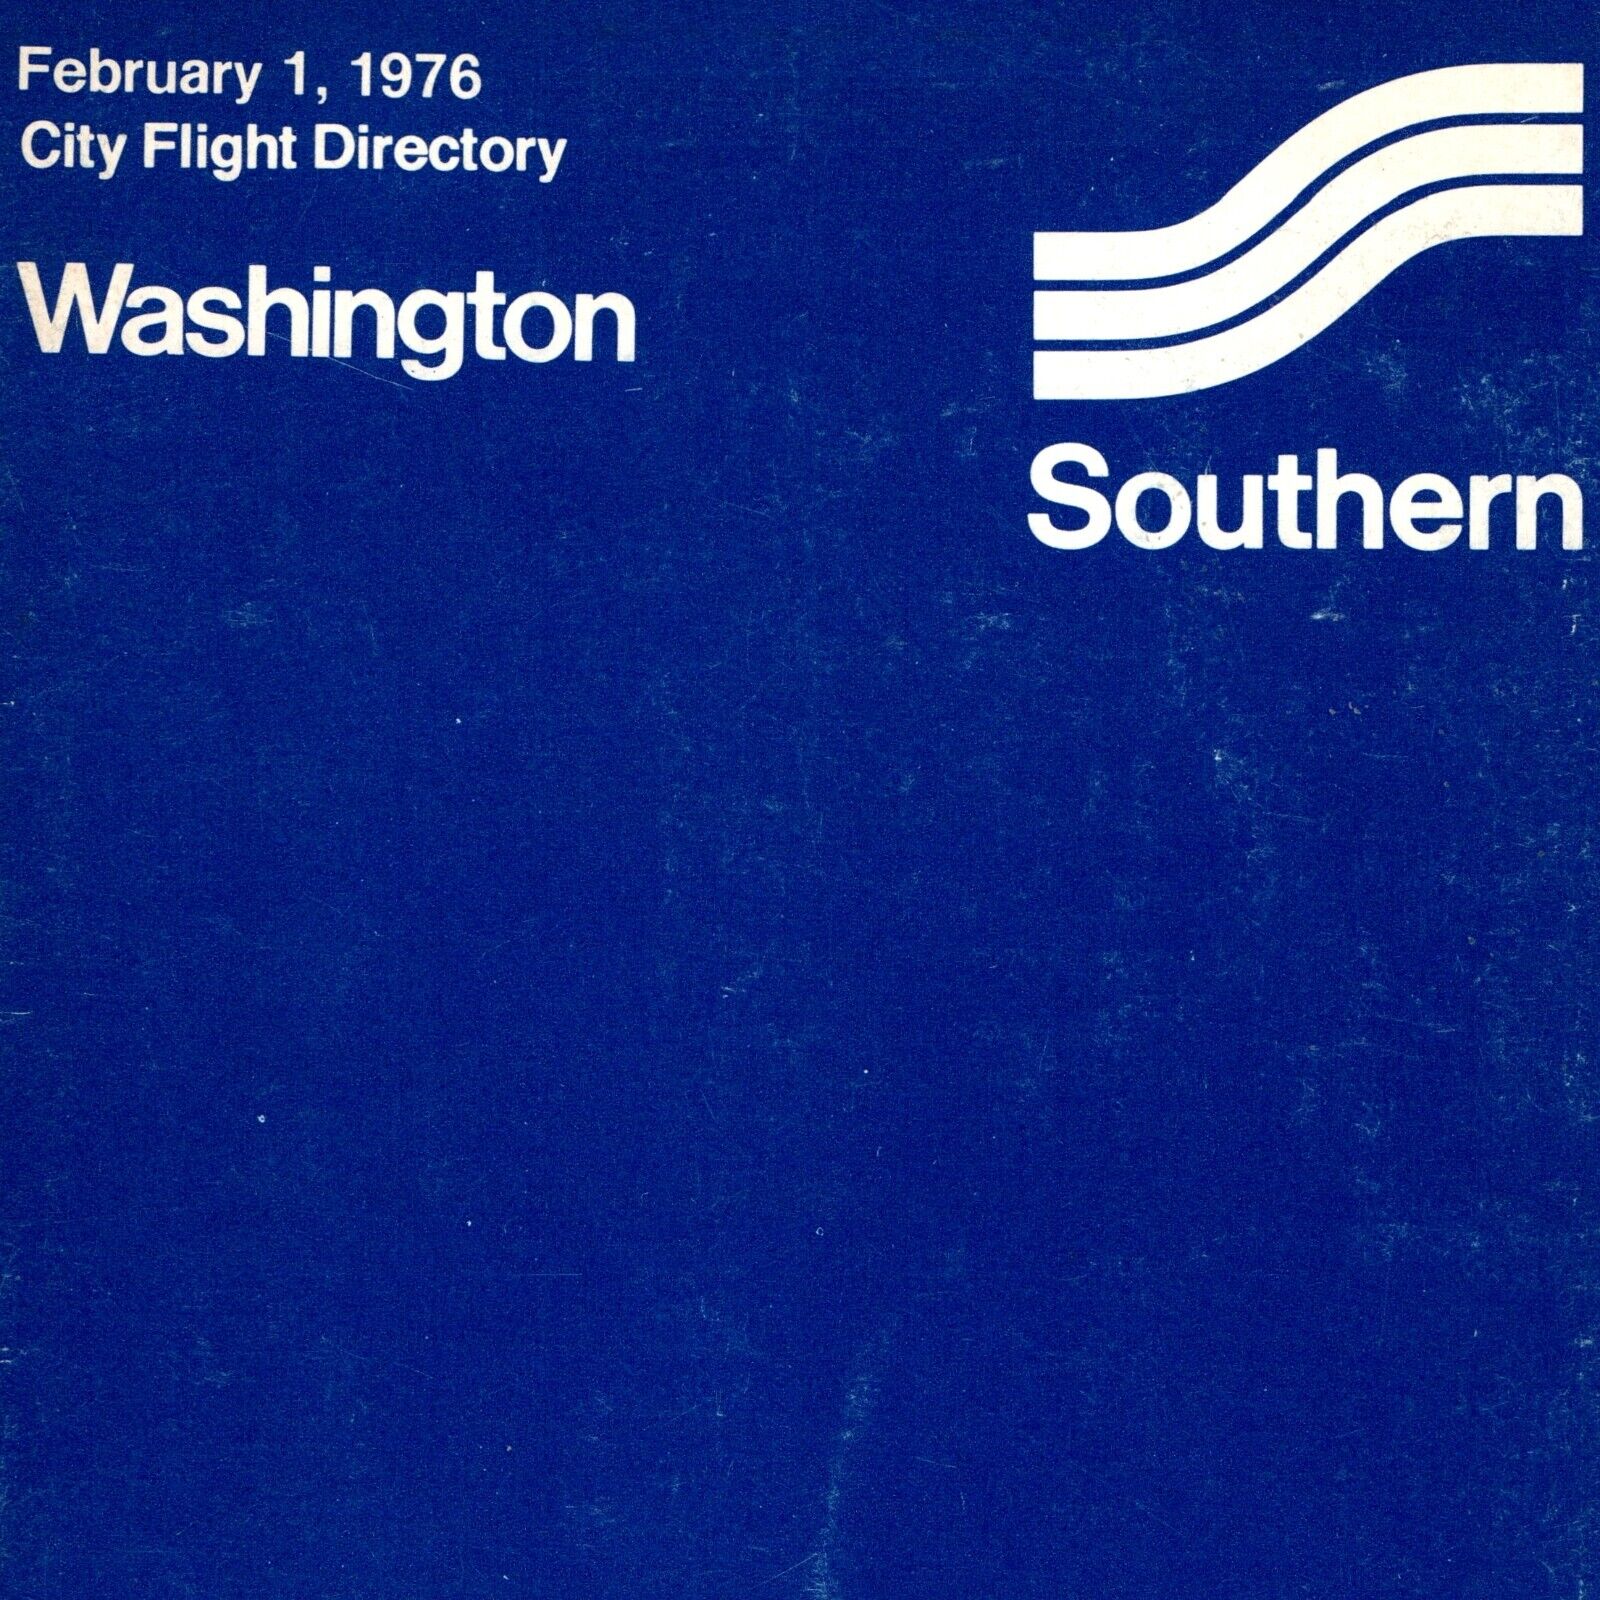 1976/2/1 Southern Airways Timetable WASHINGTON DC City Flight Directory Lines 4A